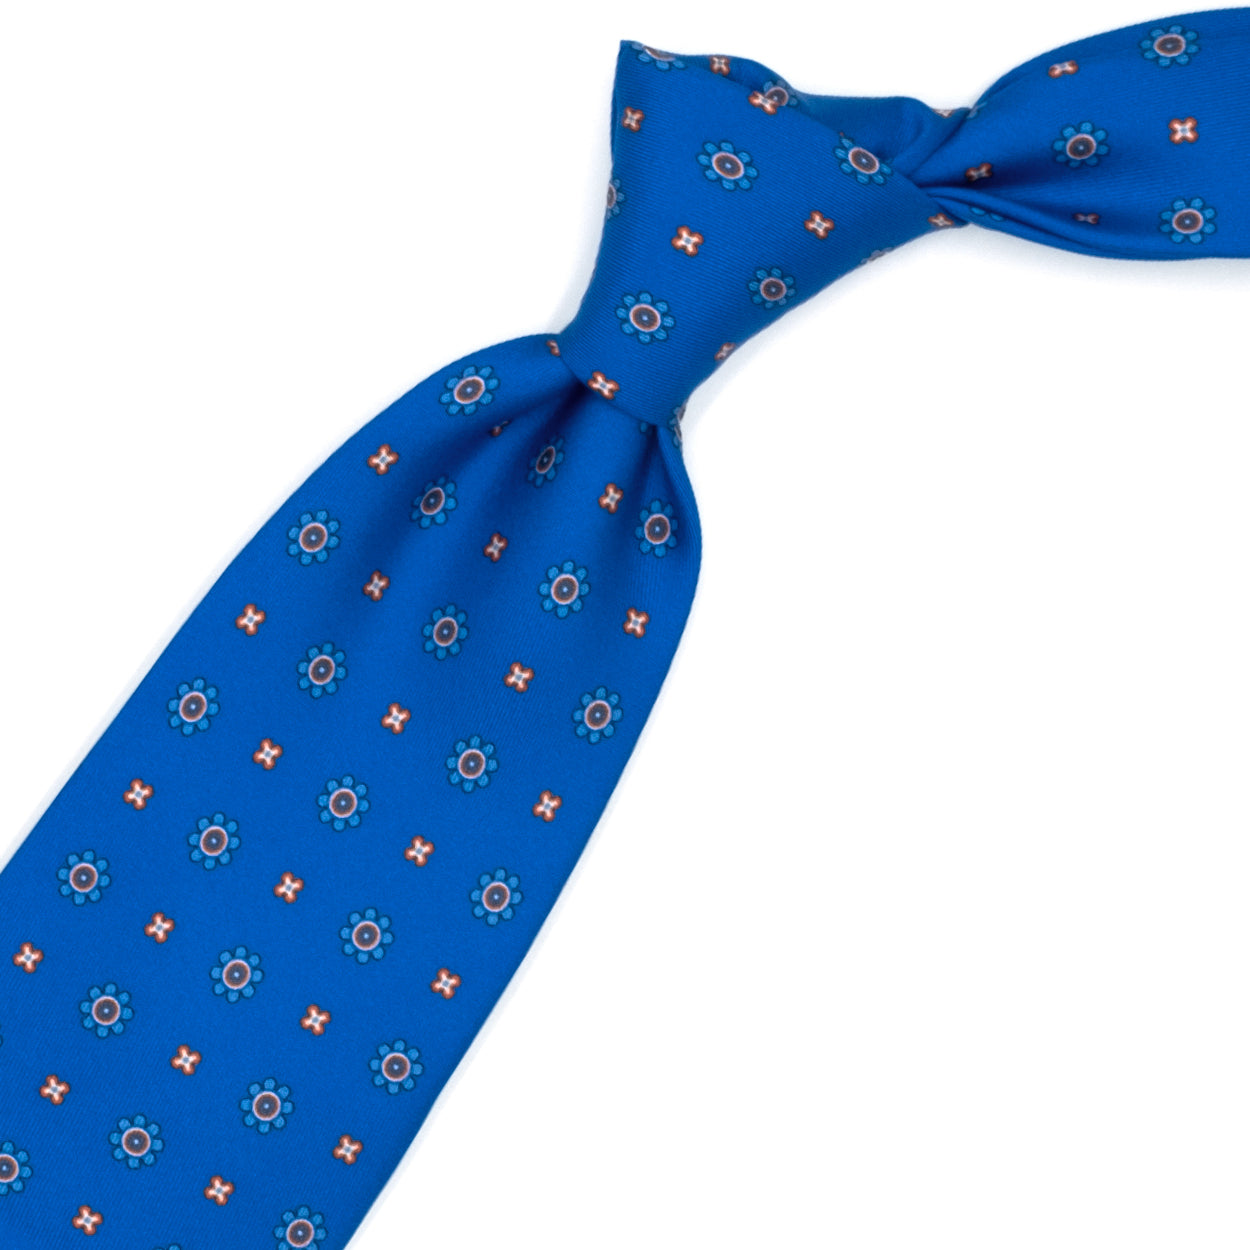 Blue tie with orange and blue flowers